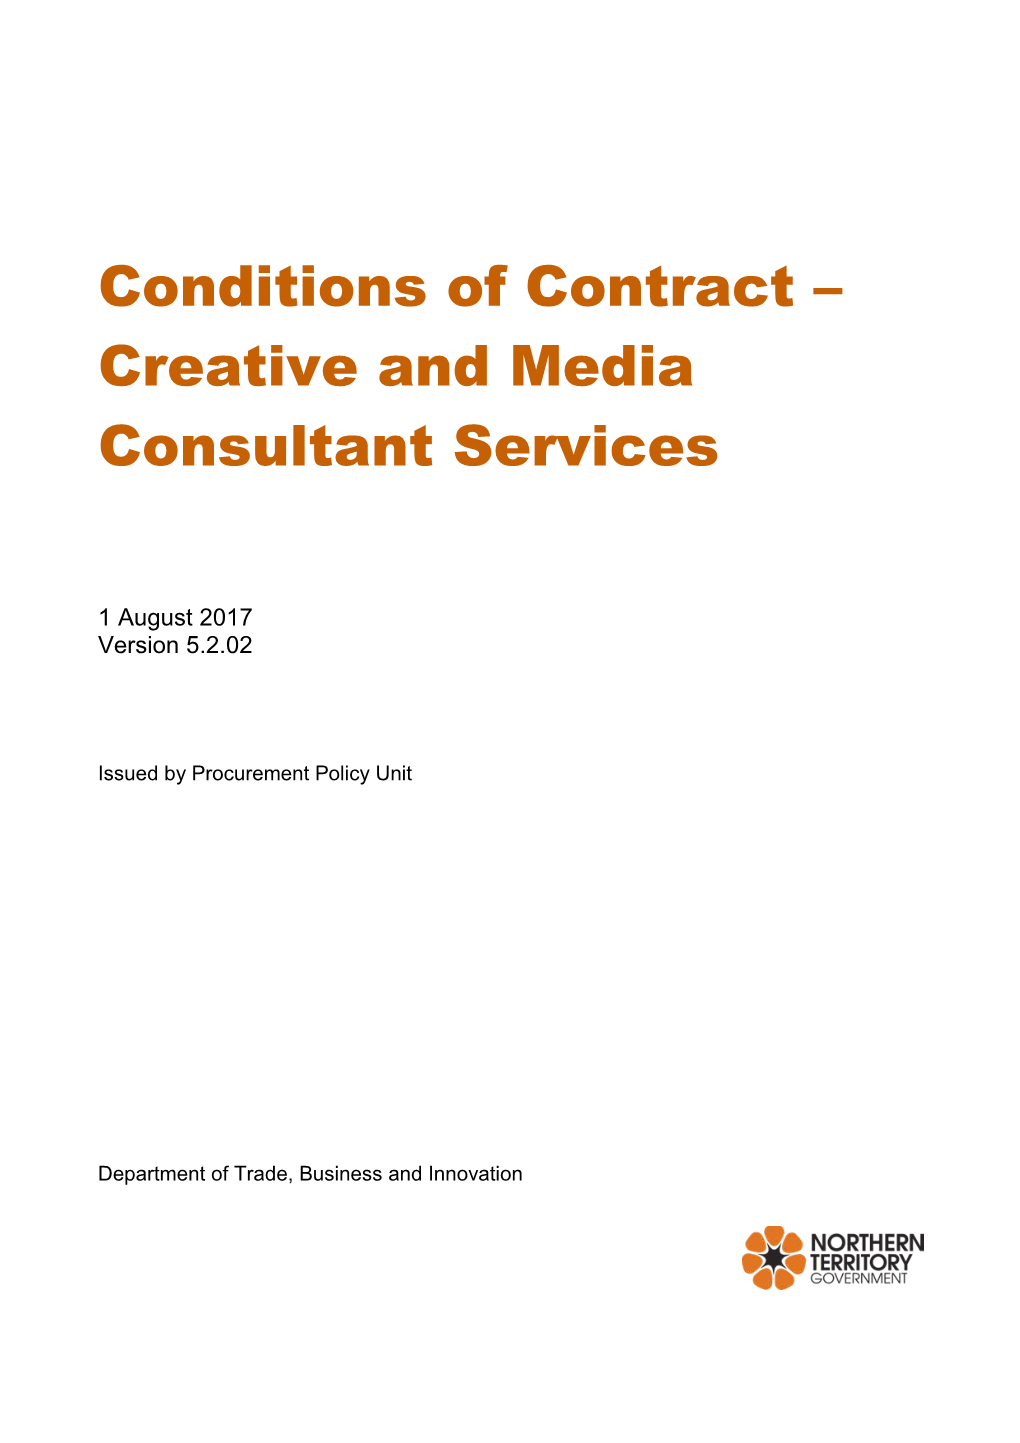 Conditions of Contract Creative and Media Consultant Services